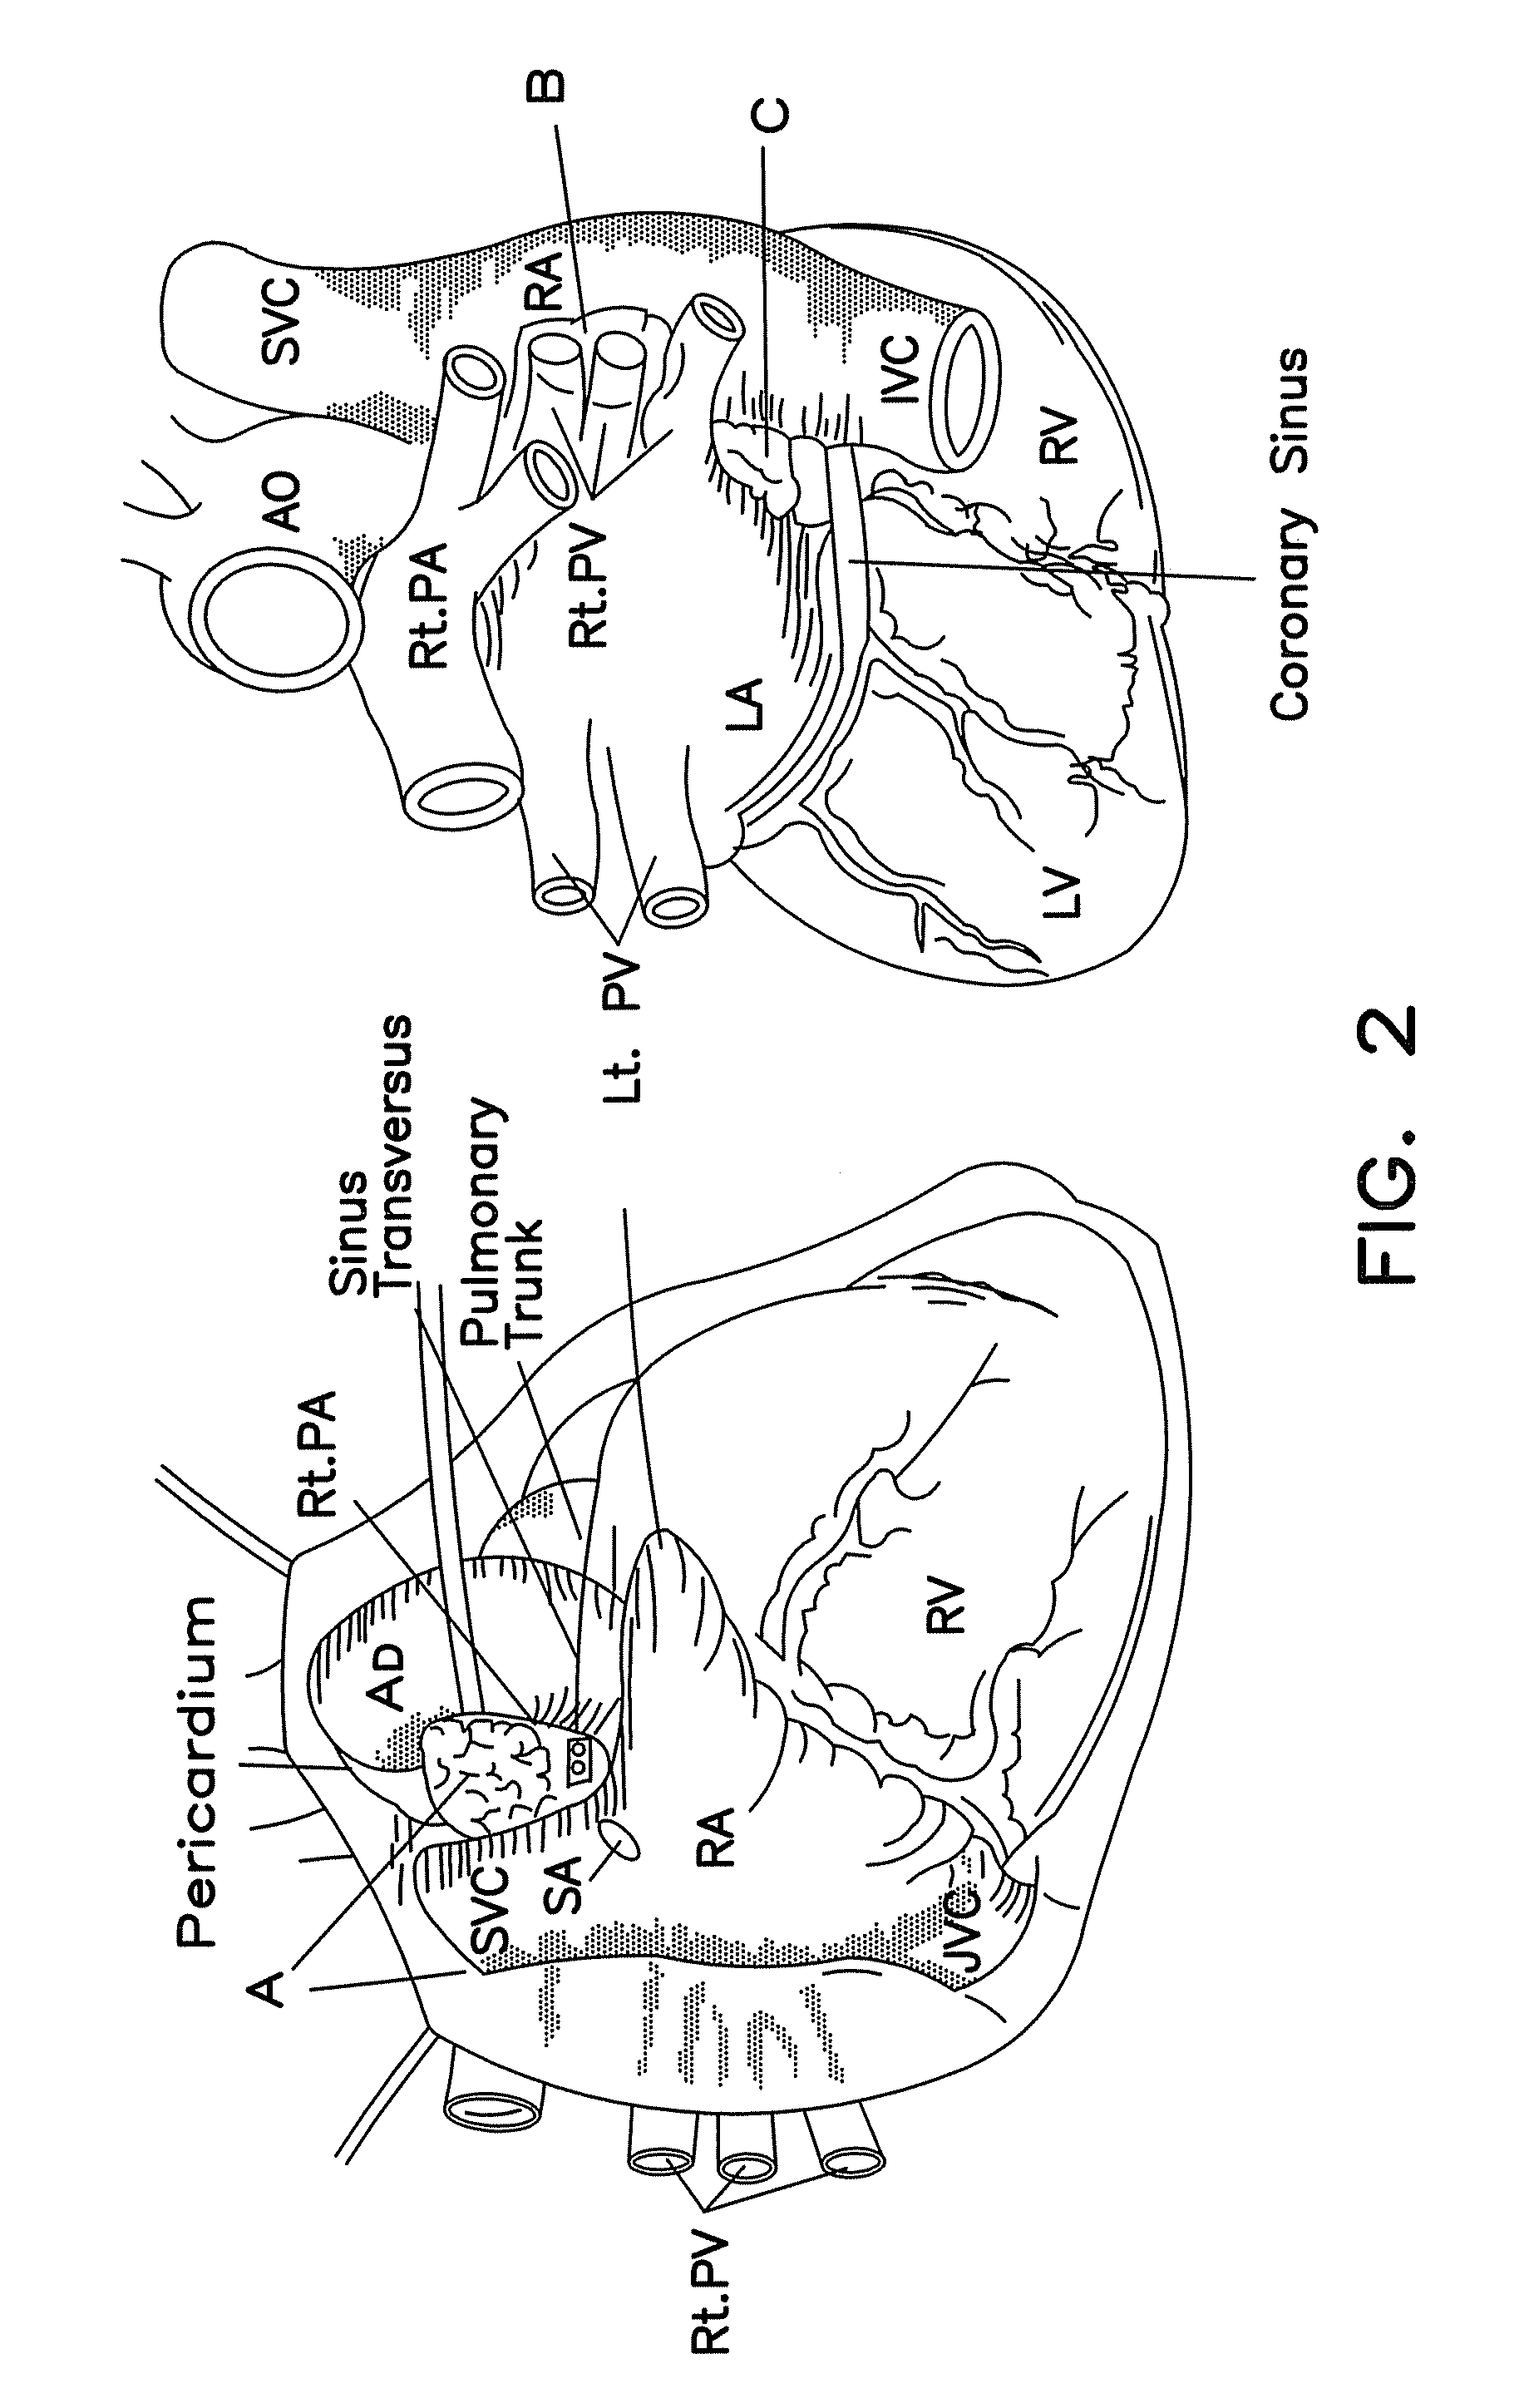 Method for arrhythmias treatment based on spectral mapping during sinus rhythm